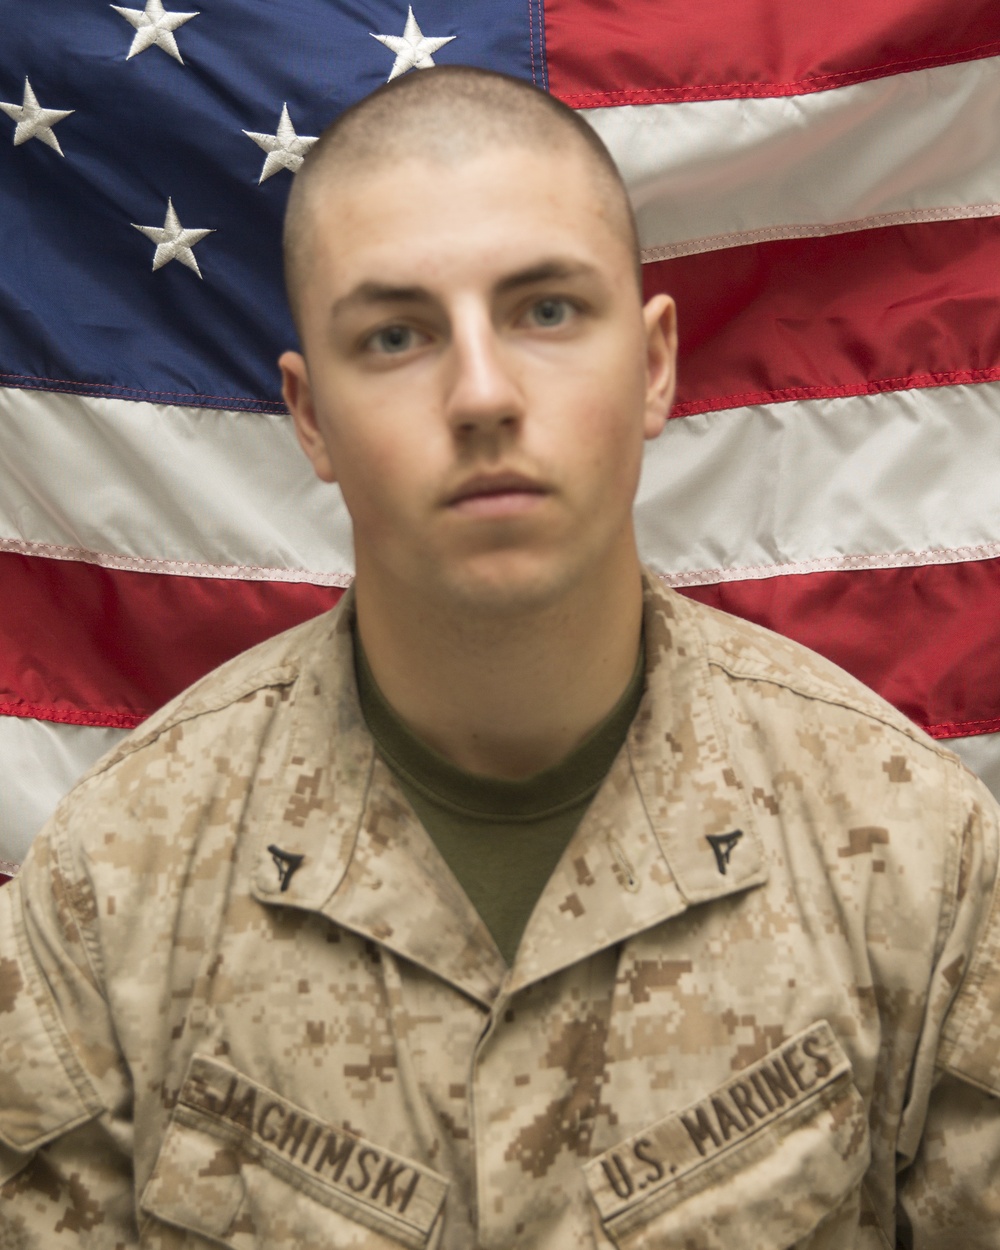 Maryland native serving with the 24th MEU